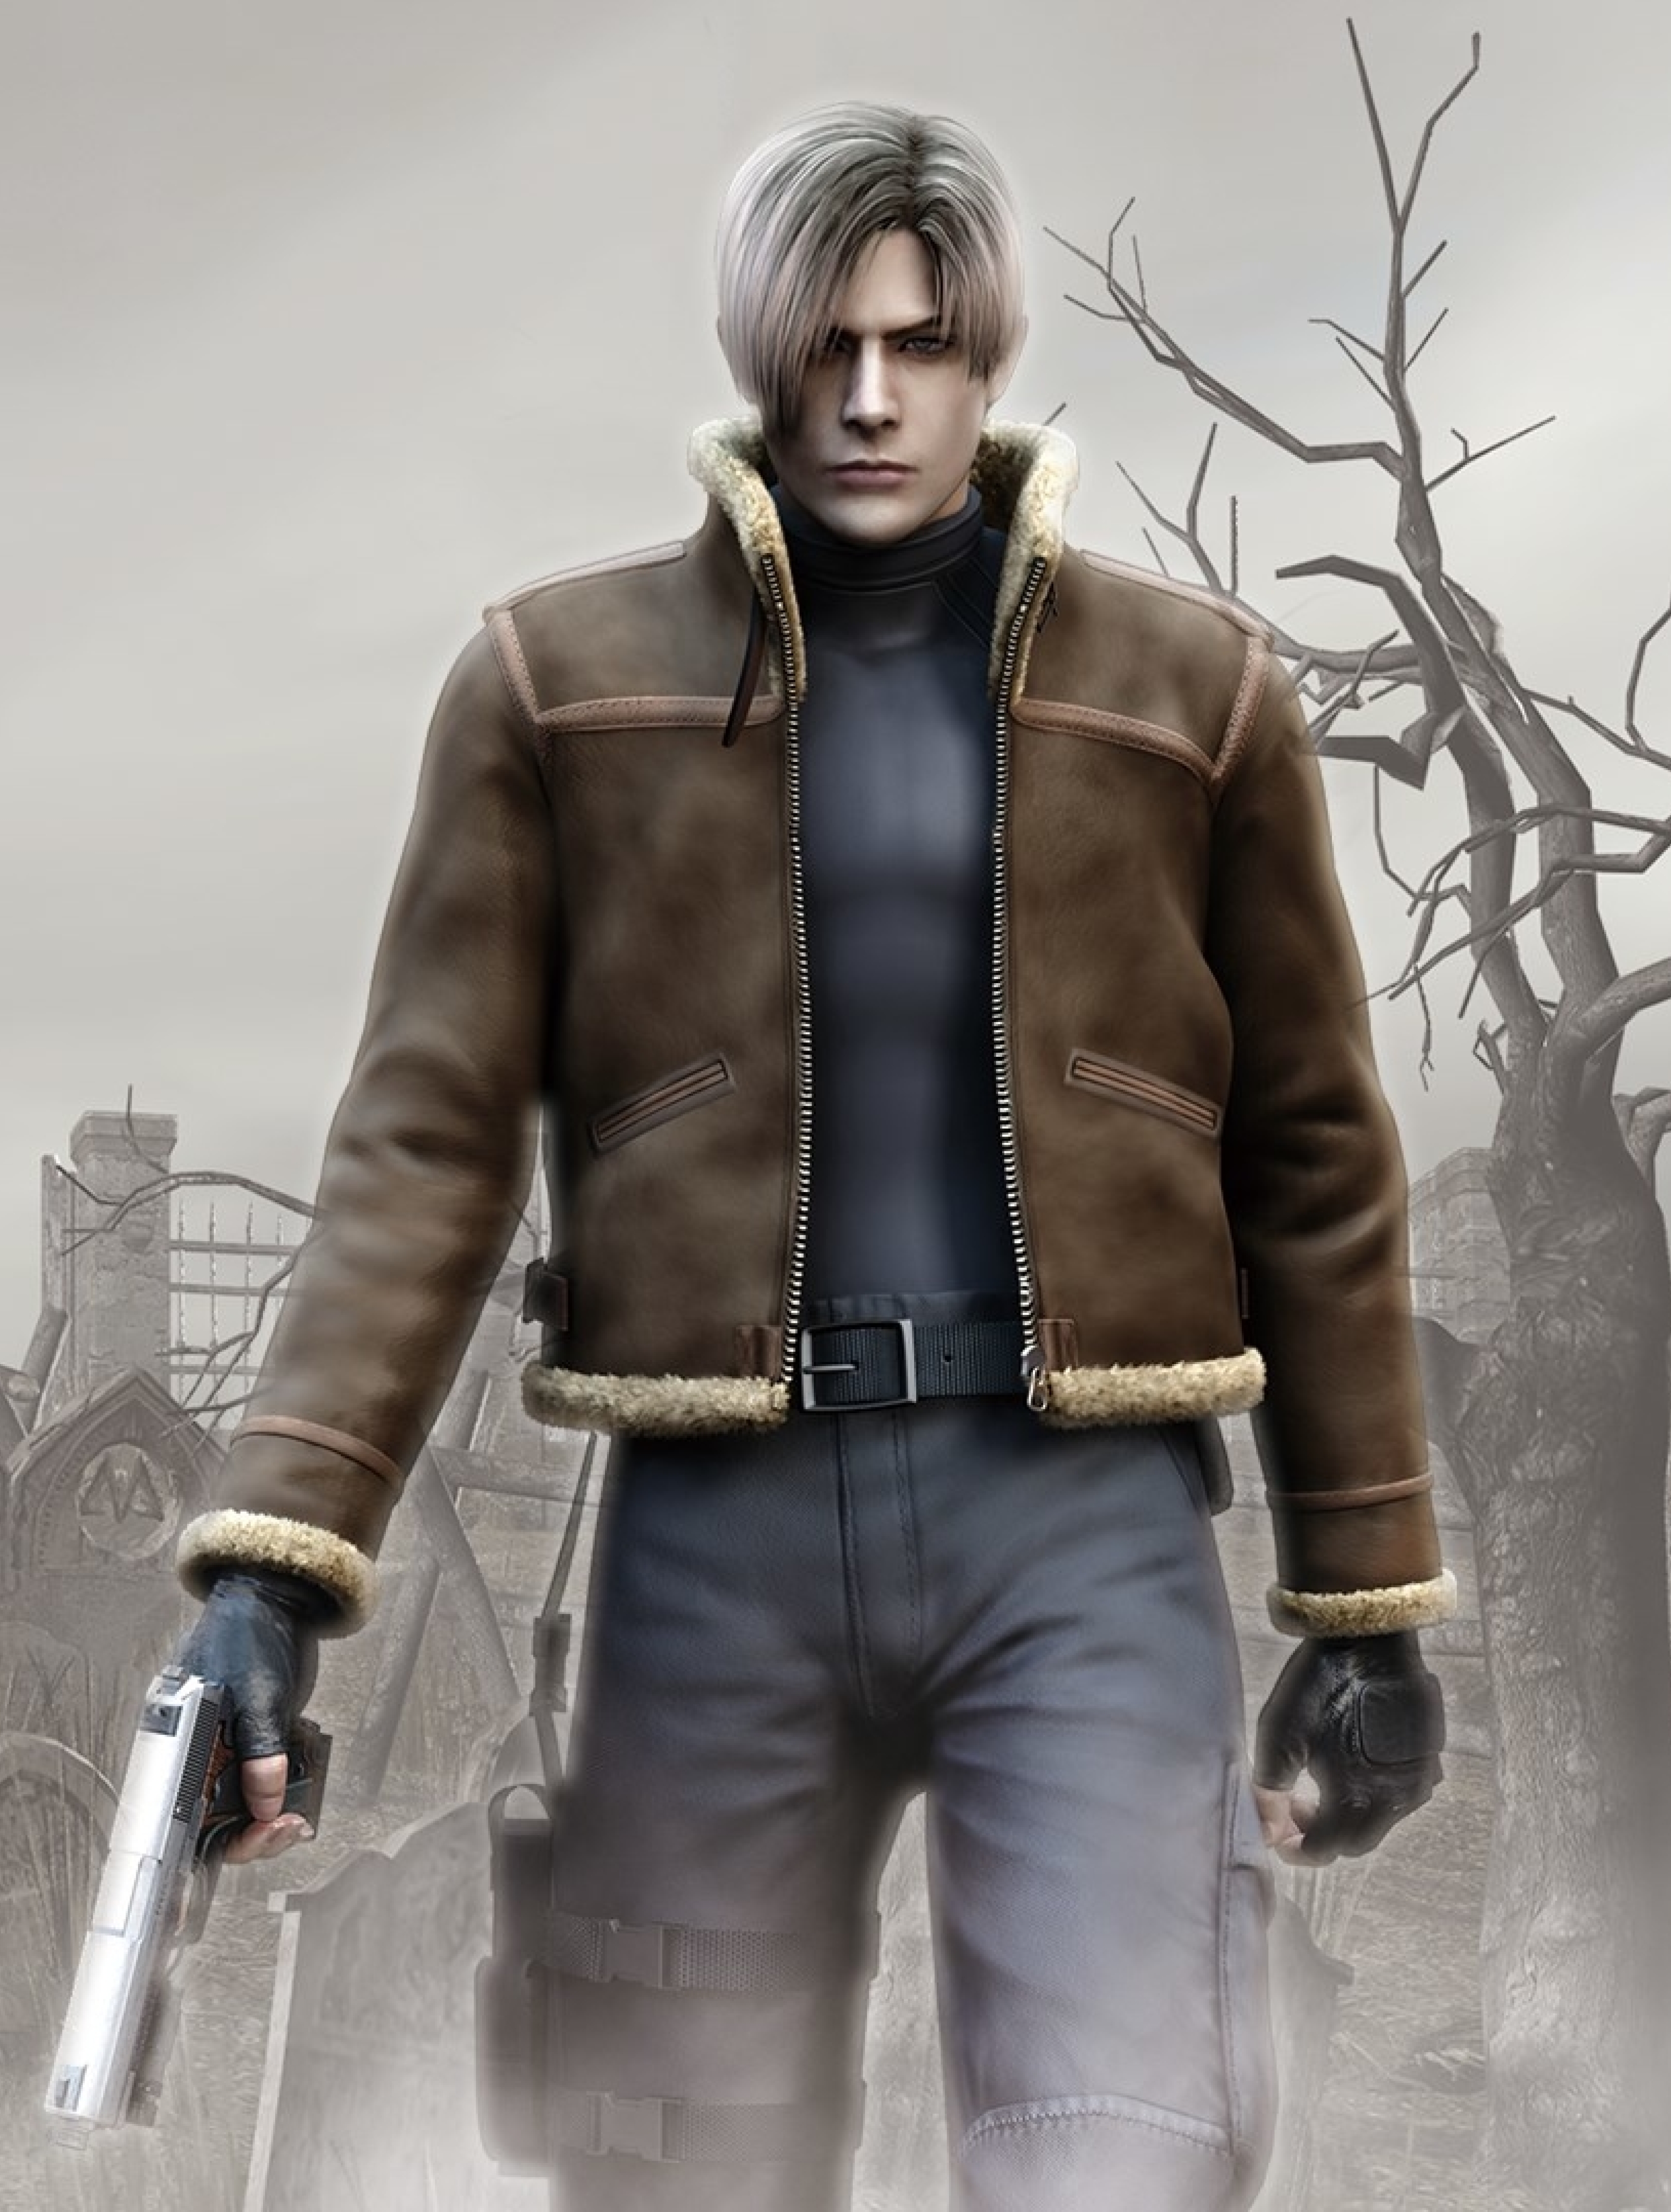 Leon Kennedy, video game characters, Leon S. Kennedy, Resident Evil, resident  evil 4 remake, Capcom, PlayStation, Playstation 5, PlayStation Share, video  games | 1190x2160 Wallpaper - wallhaven.cc